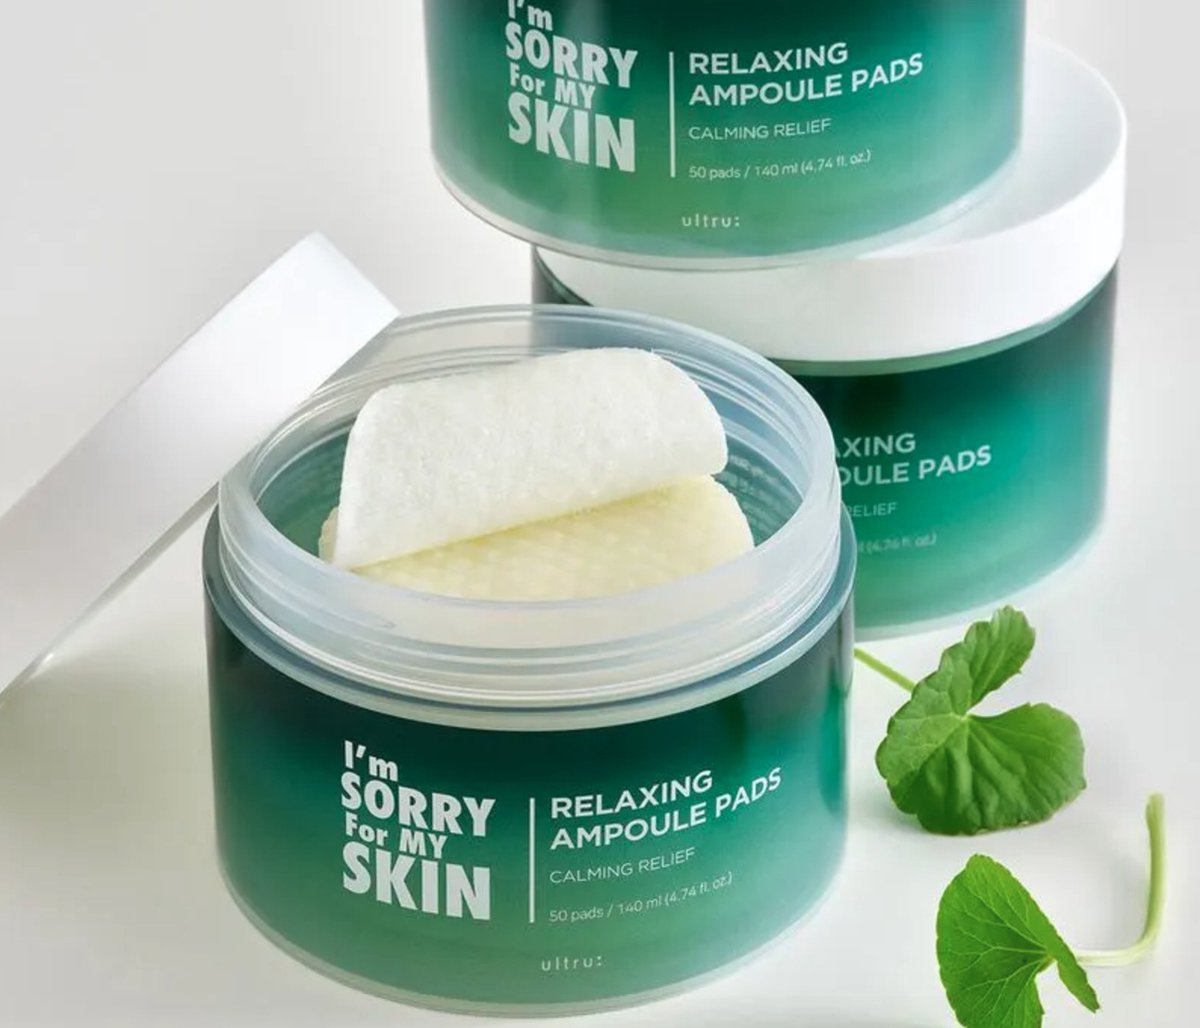 I'm SORRY For MY SKIN | Relaxing Ampoule Pads | 50 pads